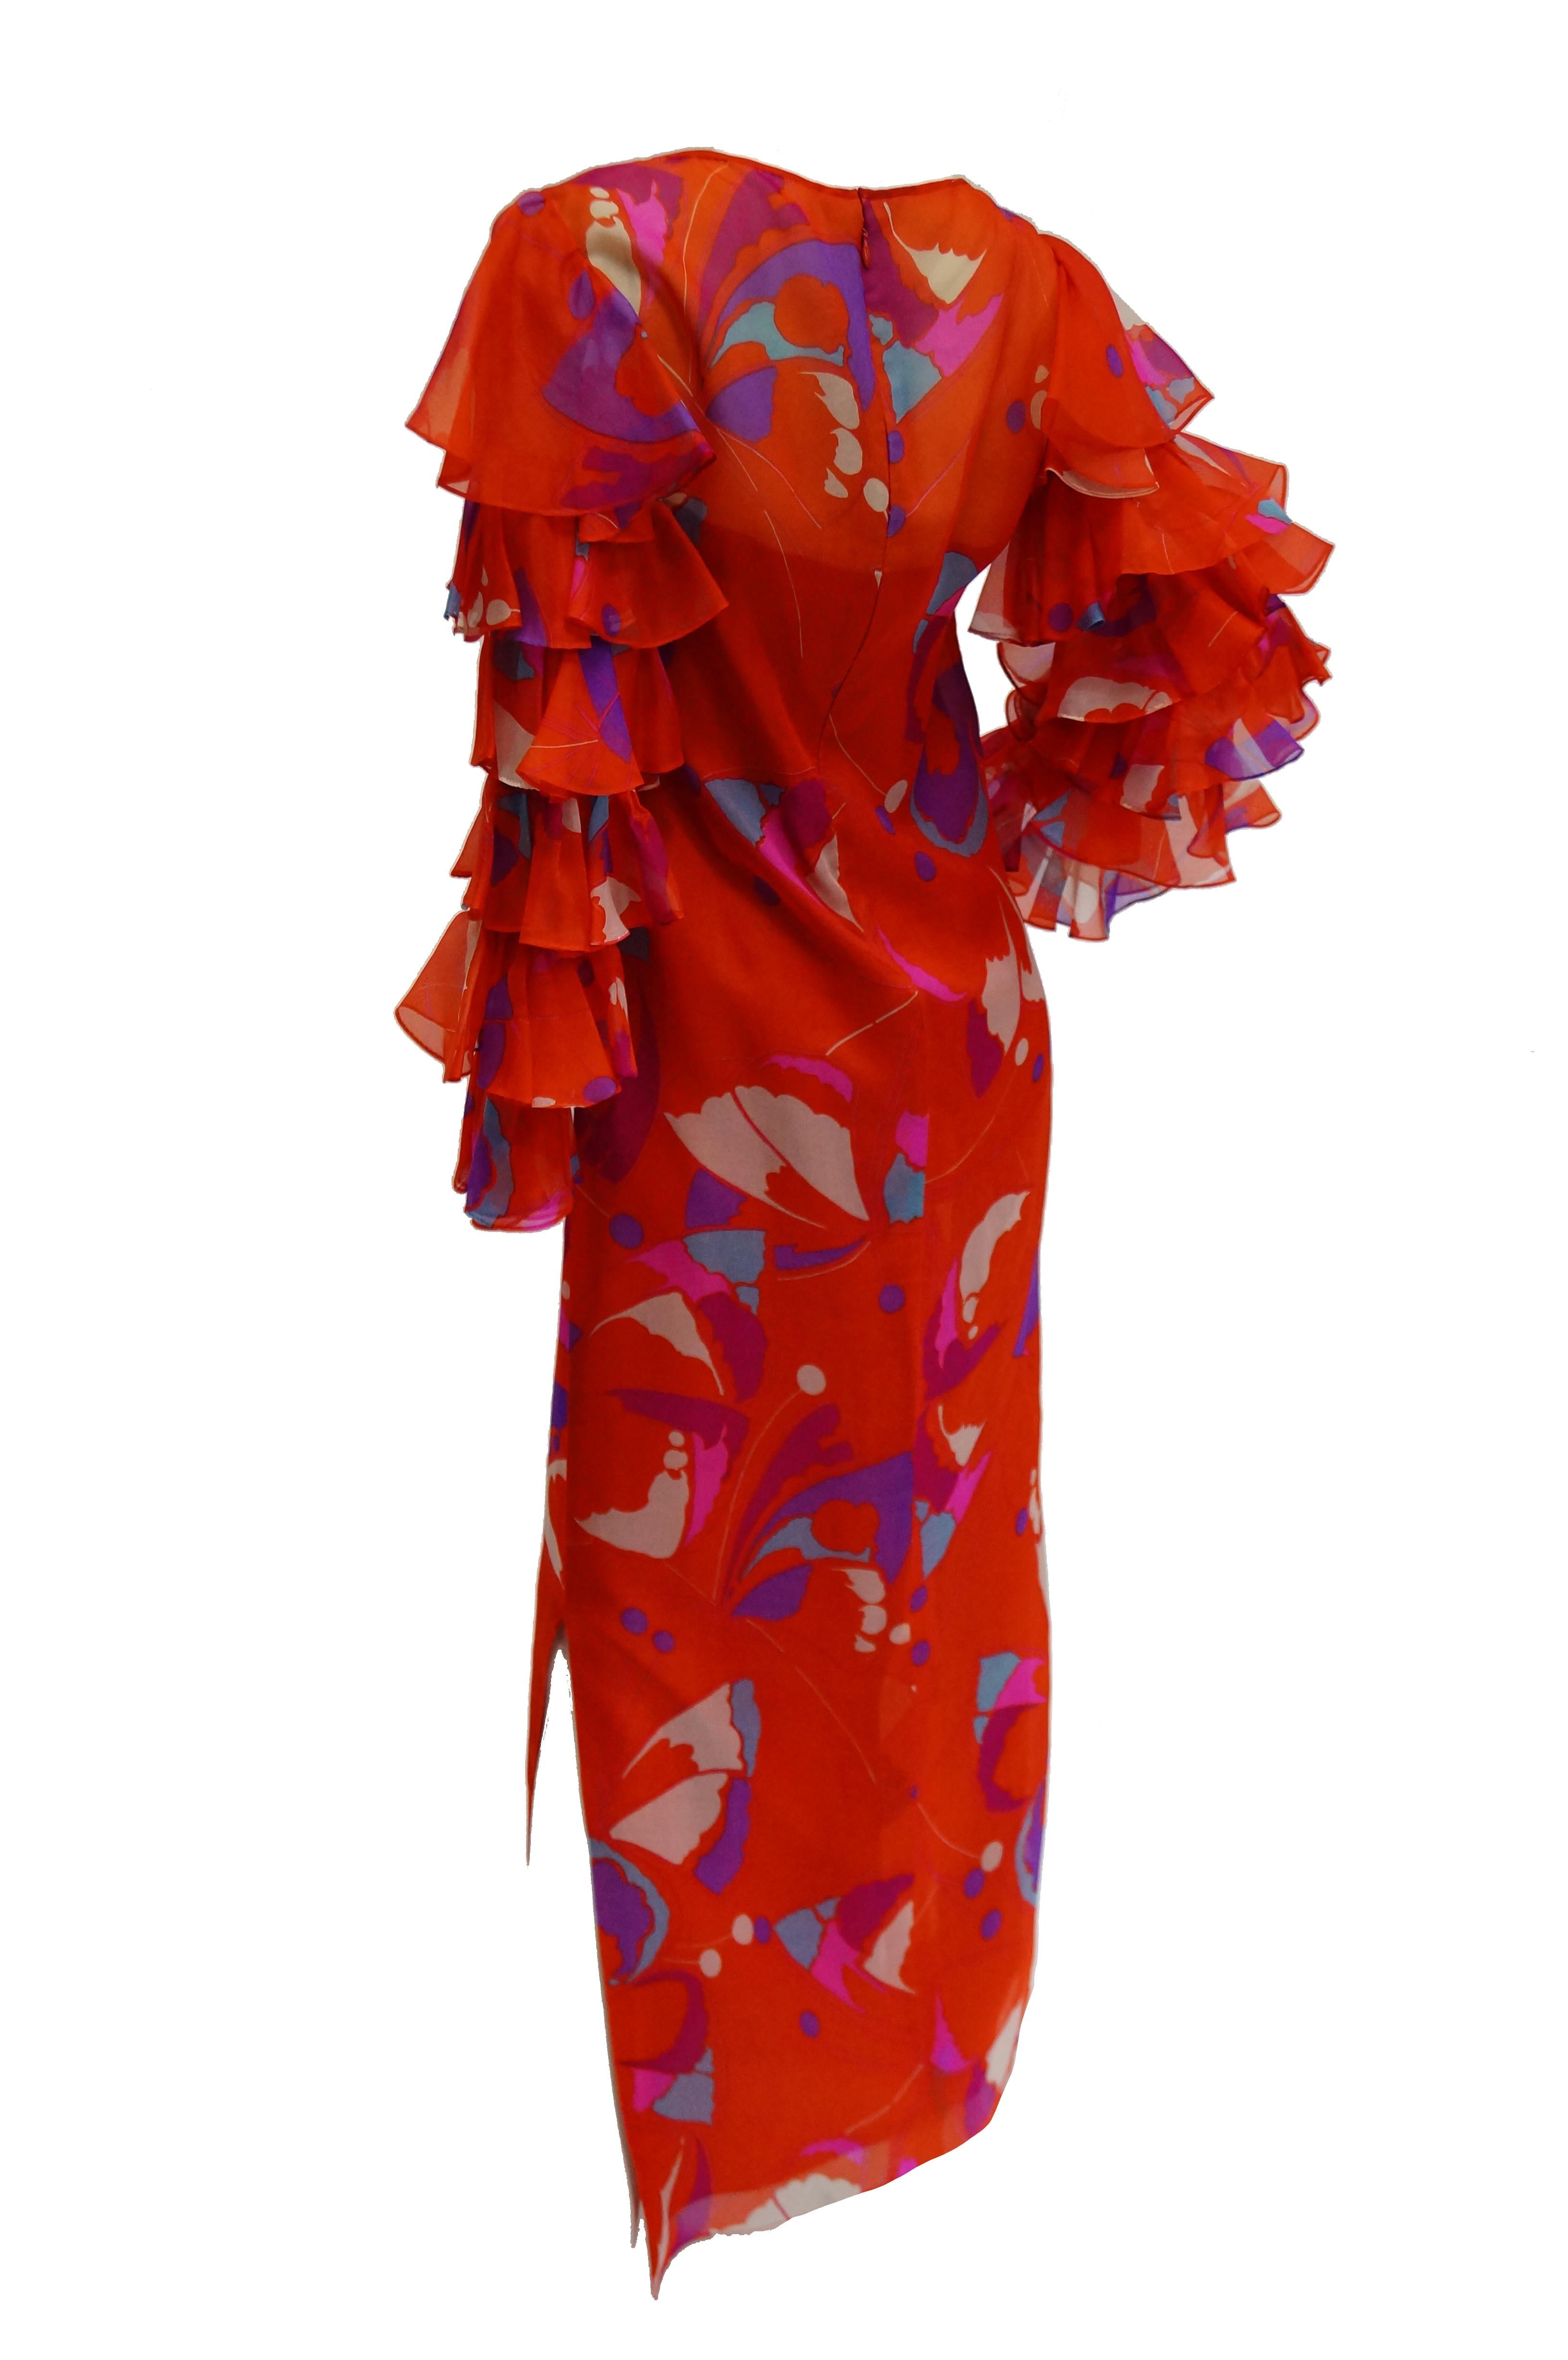 Women's 1970s Red Geometric Print Maxi Dress with Flamenco Ruffle Sleeves For Sale